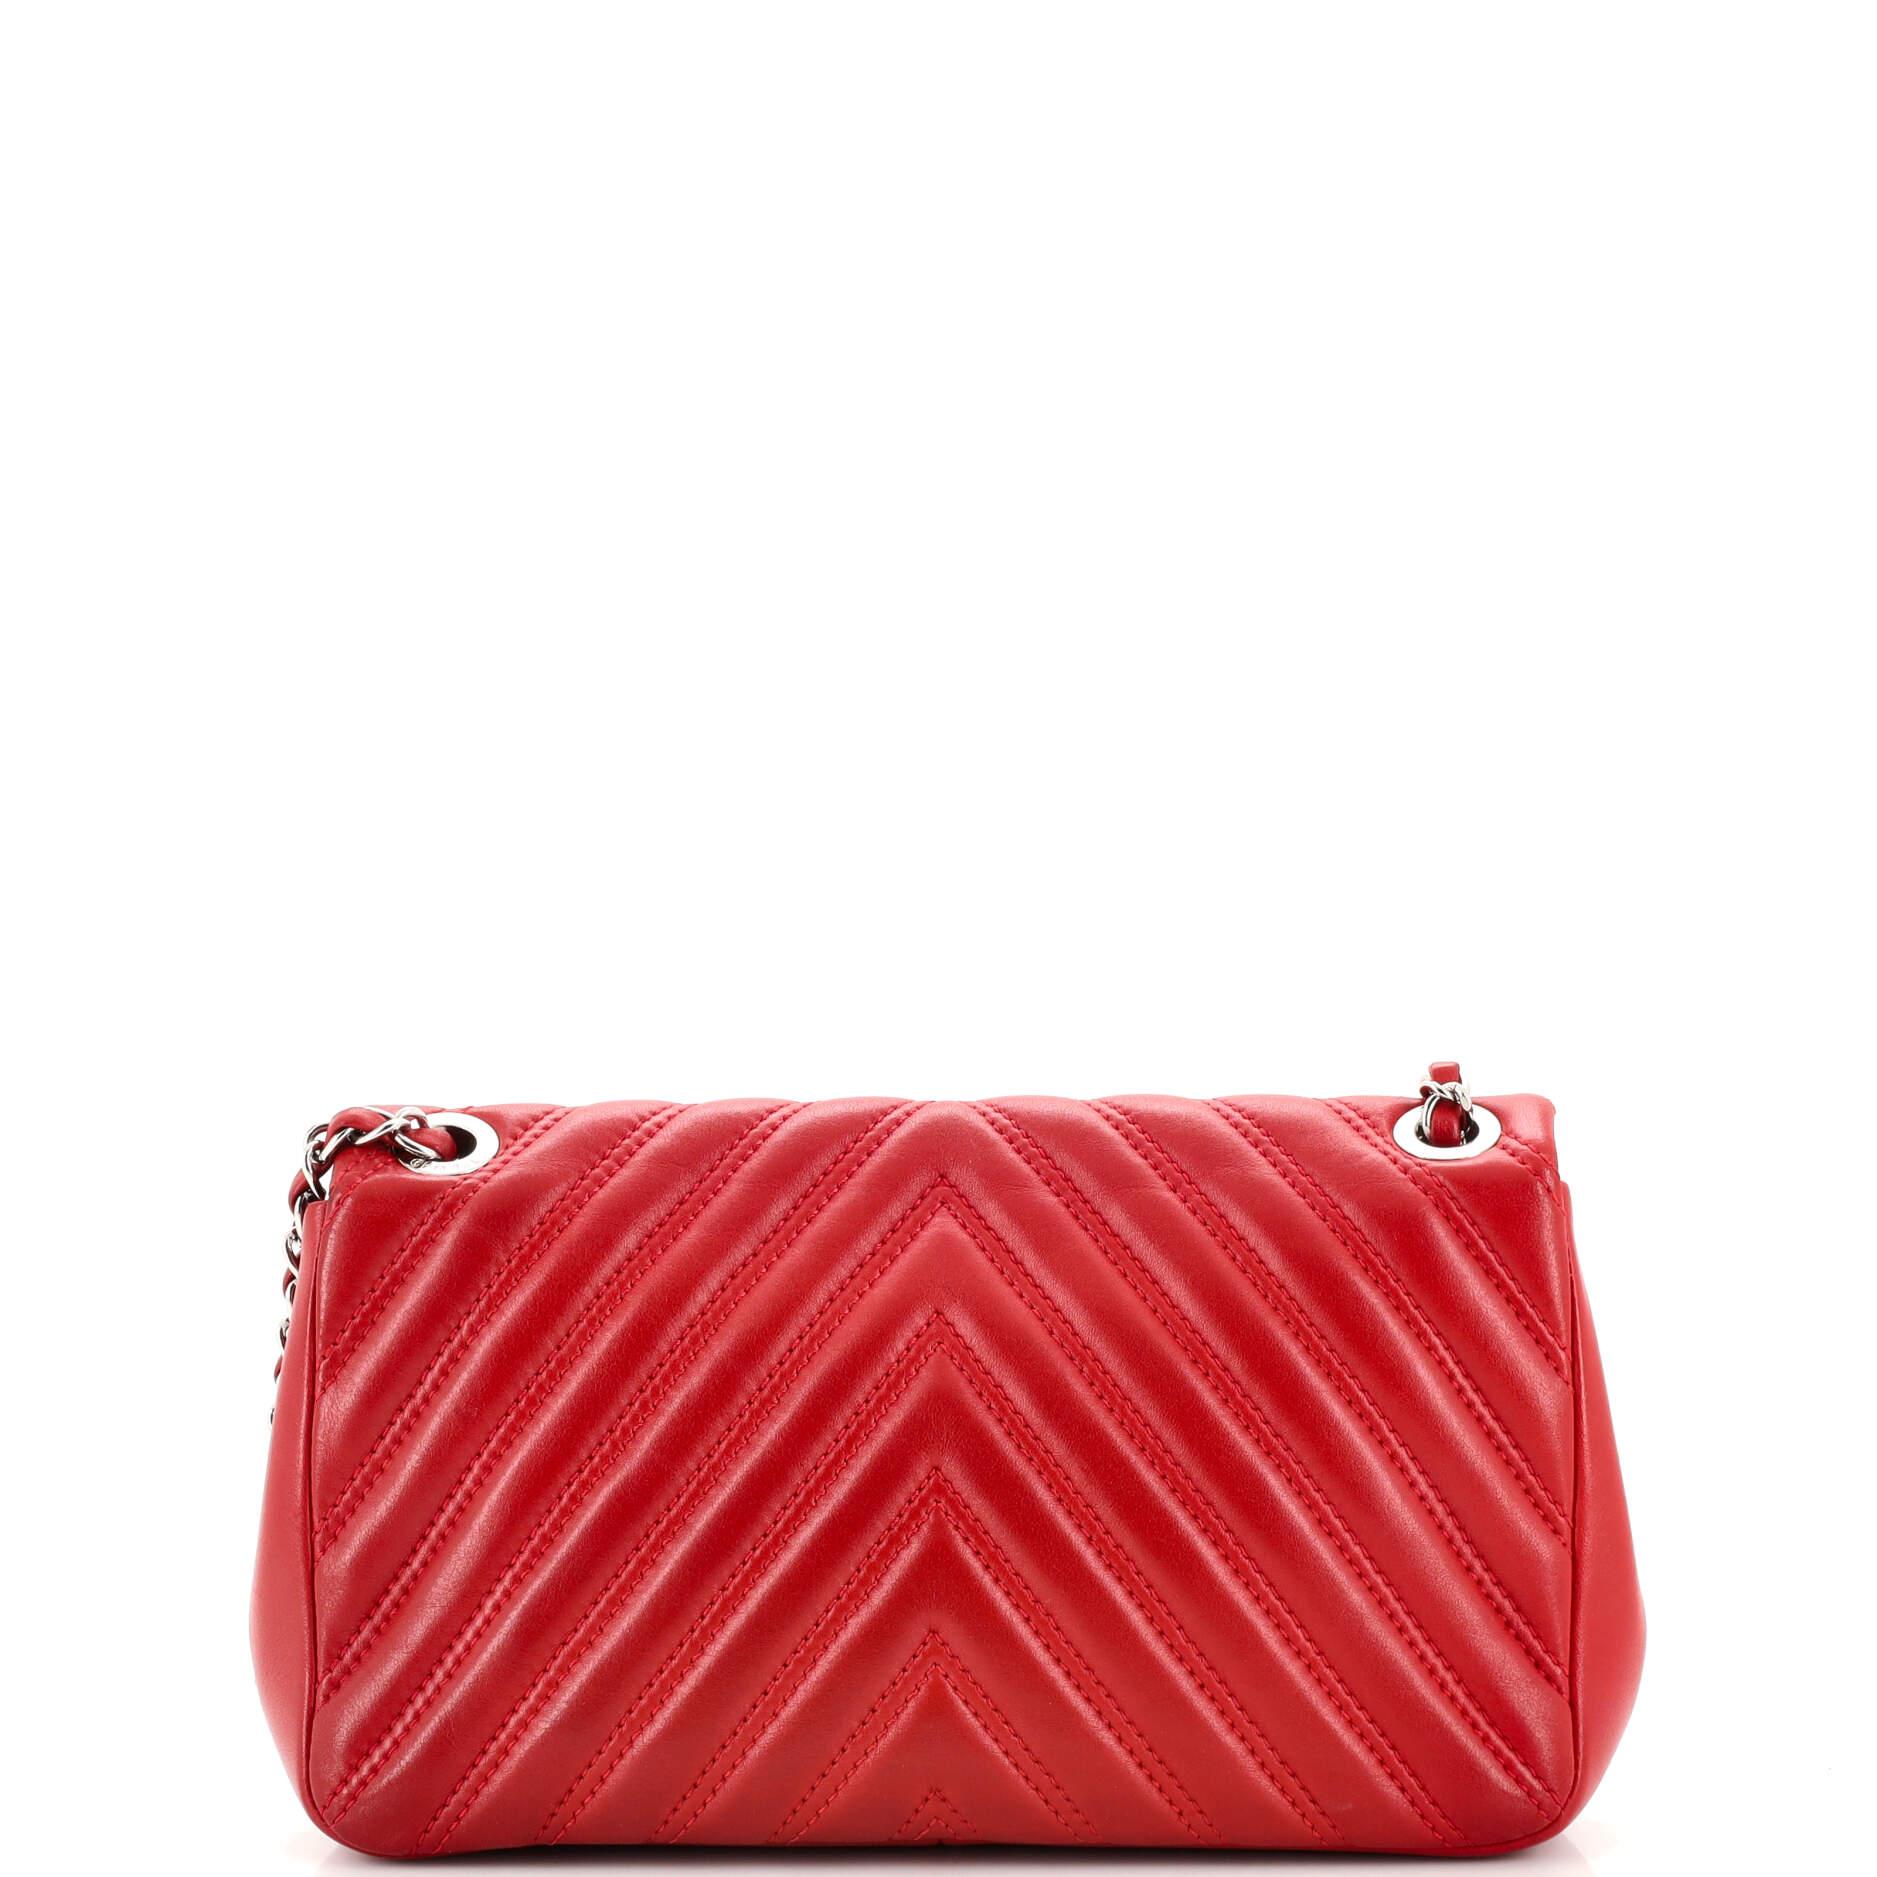 Chanel Double Stitch Flap Bag Chevron Lambskin Medium In Good Condition For Sale In NY, NY